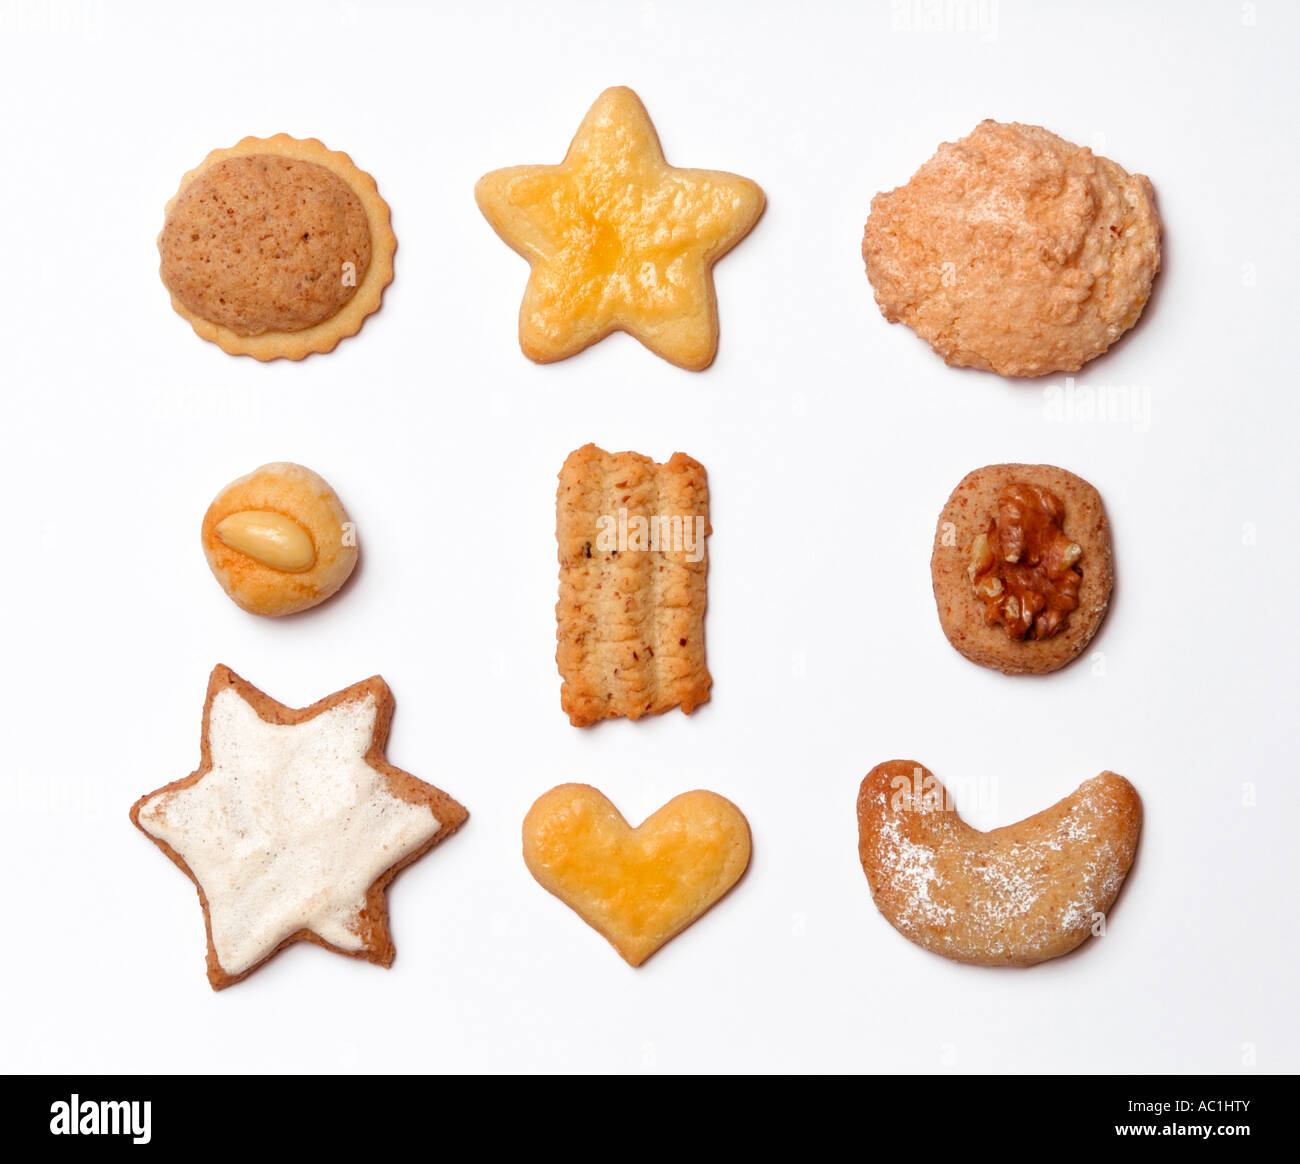 Various Christmas cookes, close-up Stock Photo